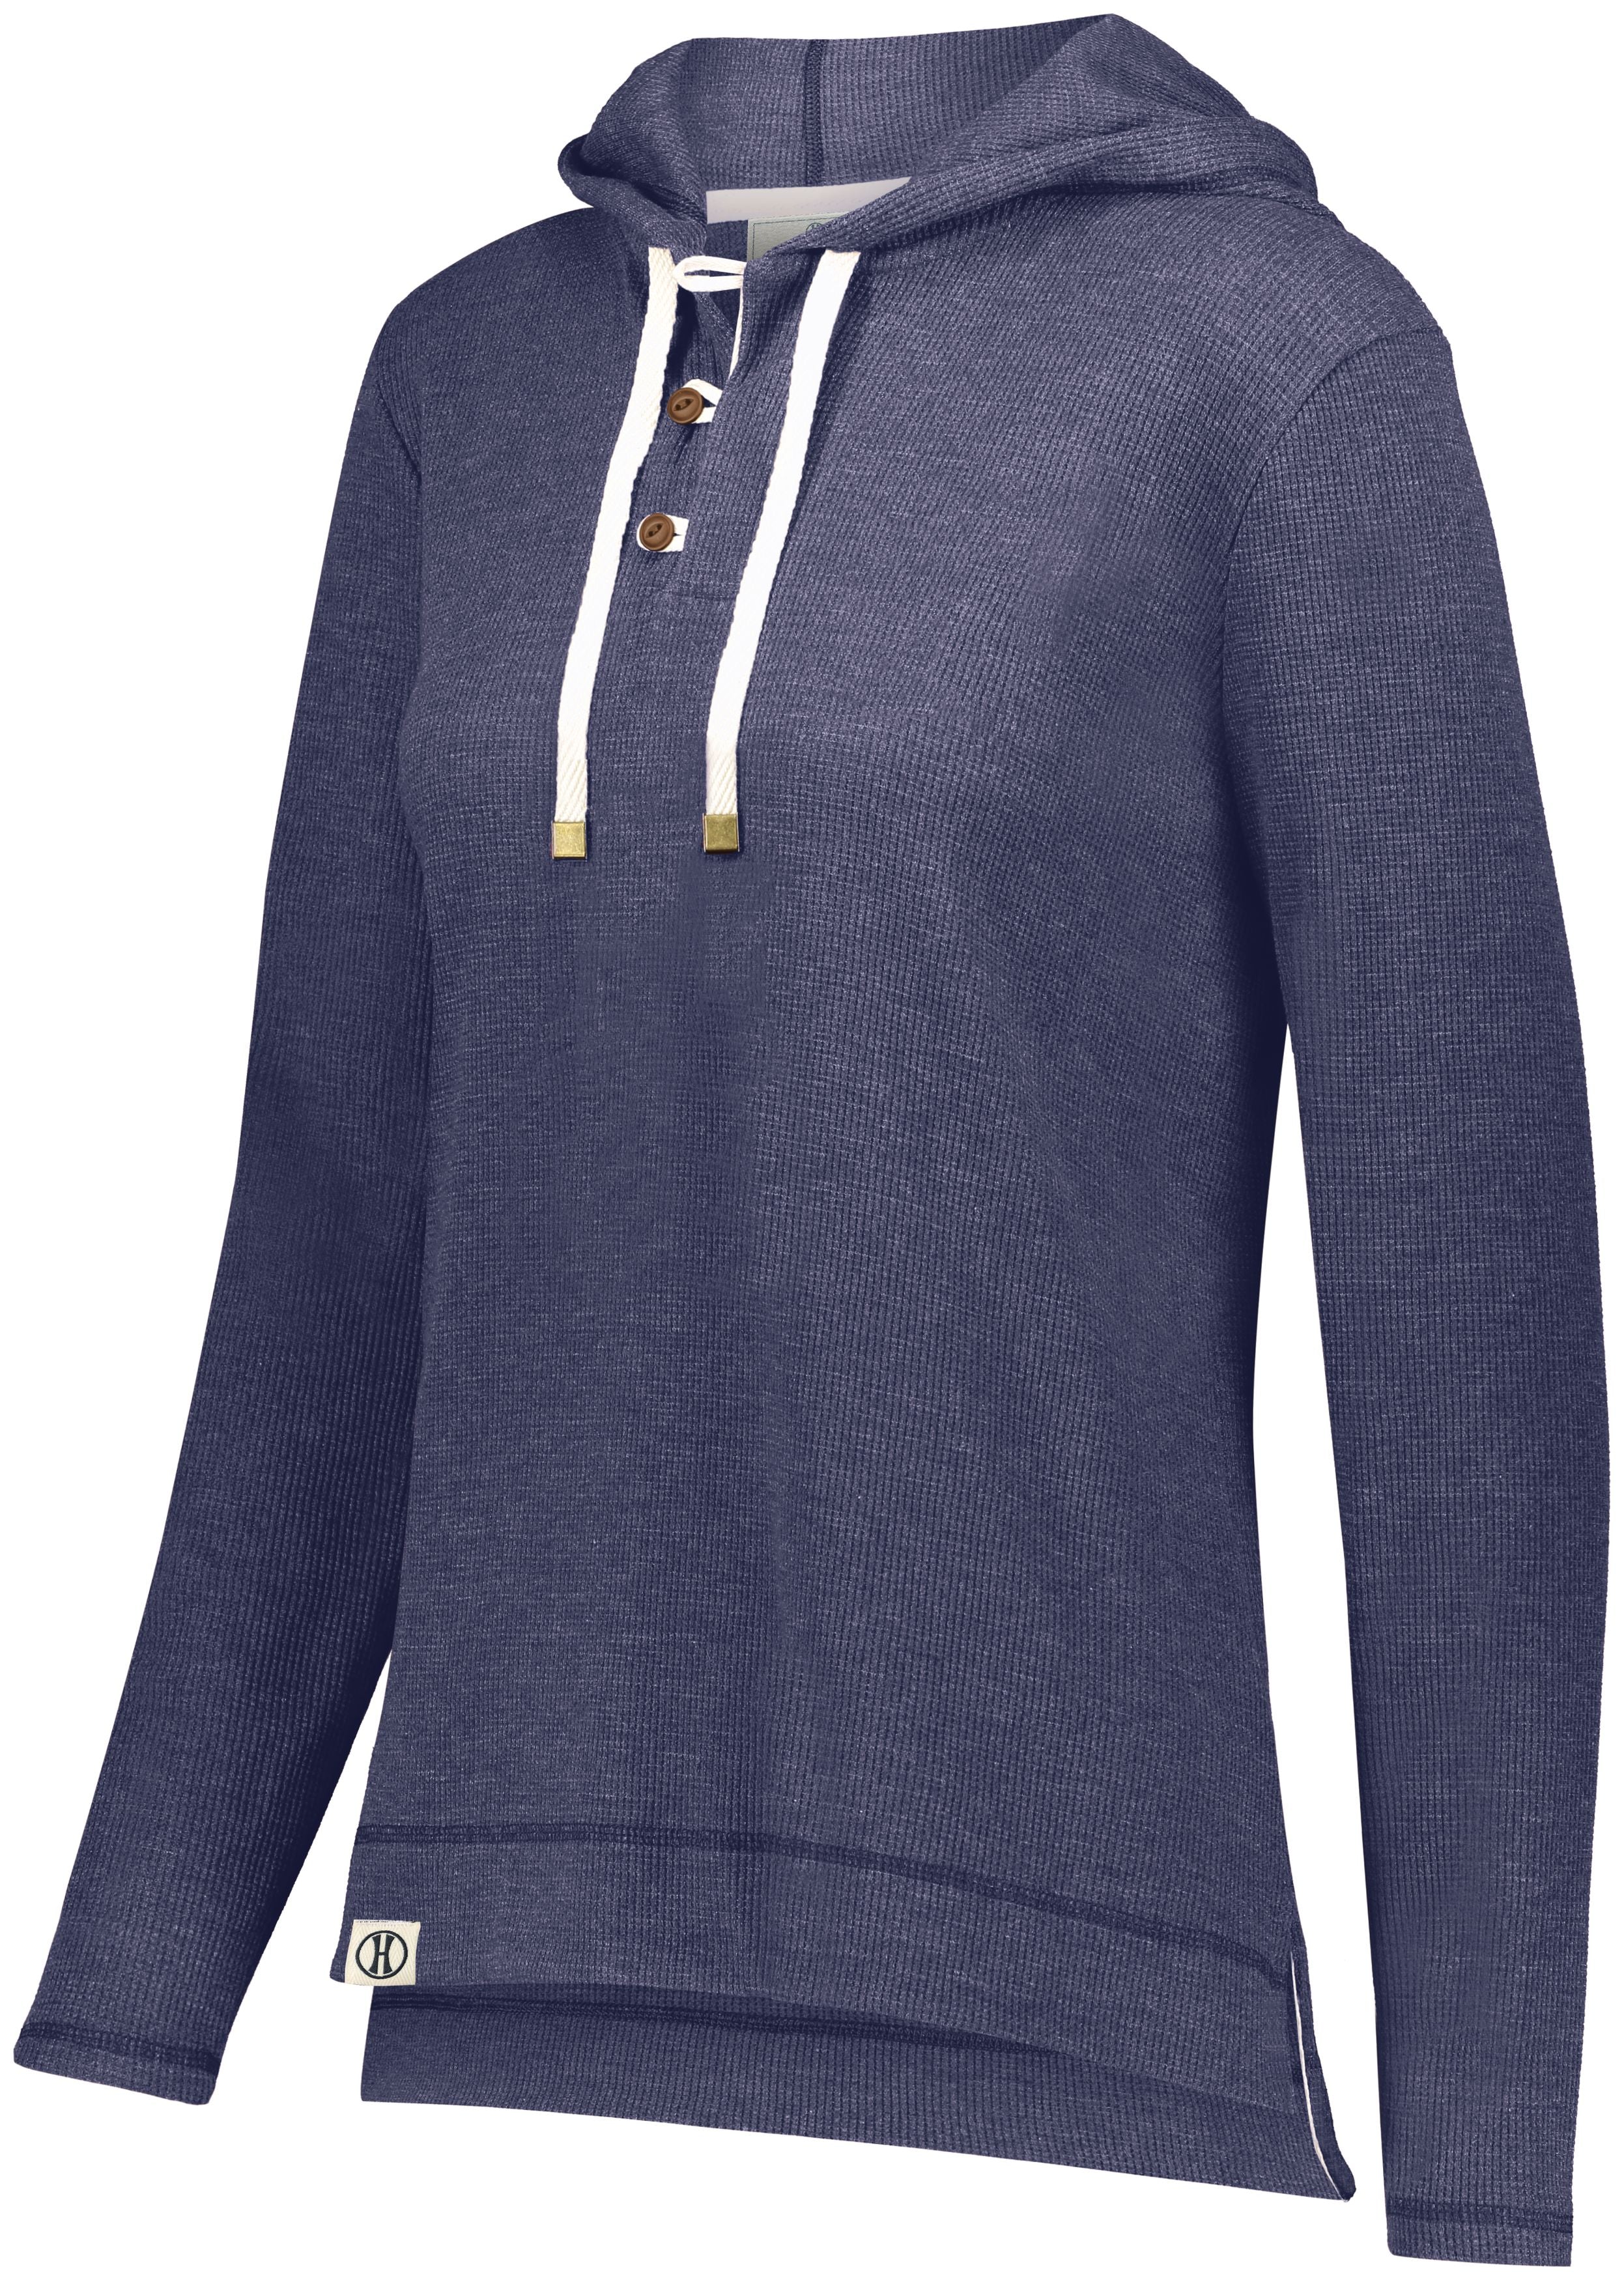 Holloway Ladies Coast Hoodie in Navy Heather  -Part of the Ladies, Holloway, Shirts product lines at KanaleyCreations.com